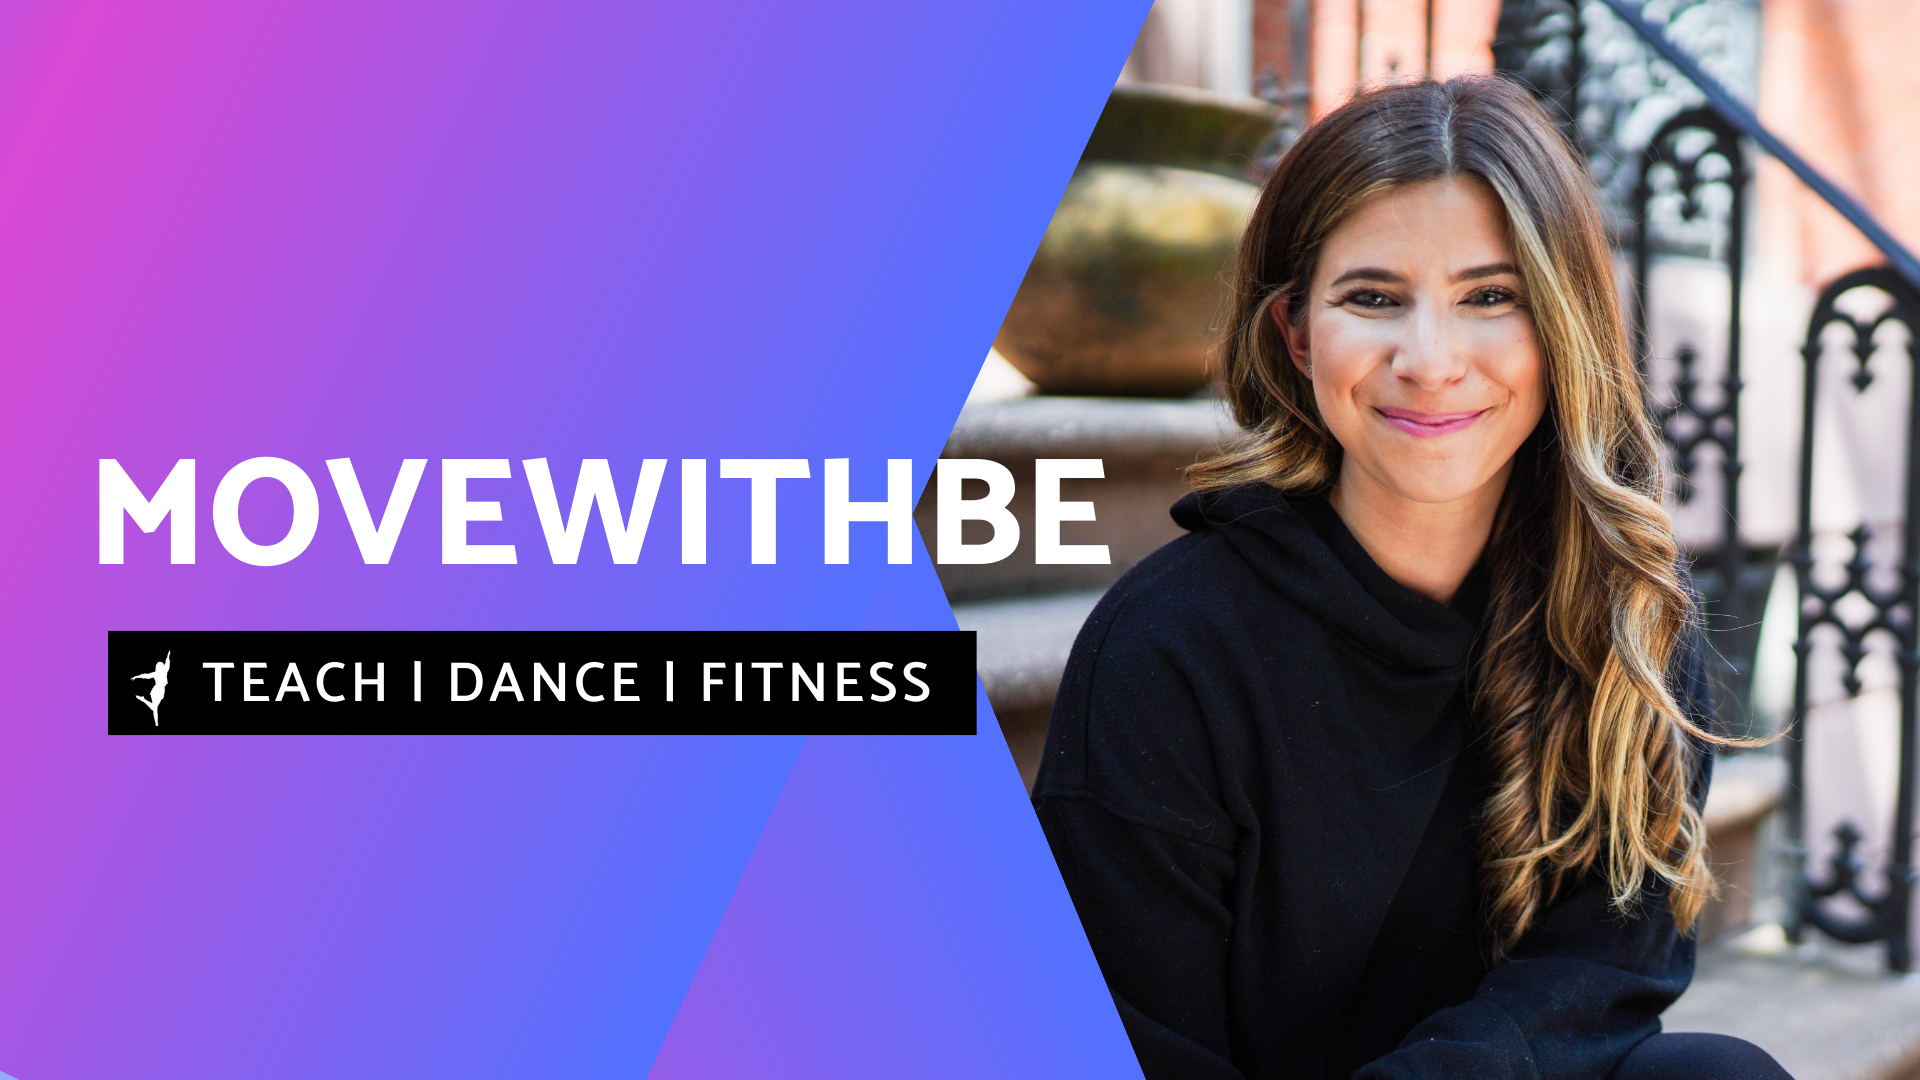 movewithBE logo "teach dance fitness"